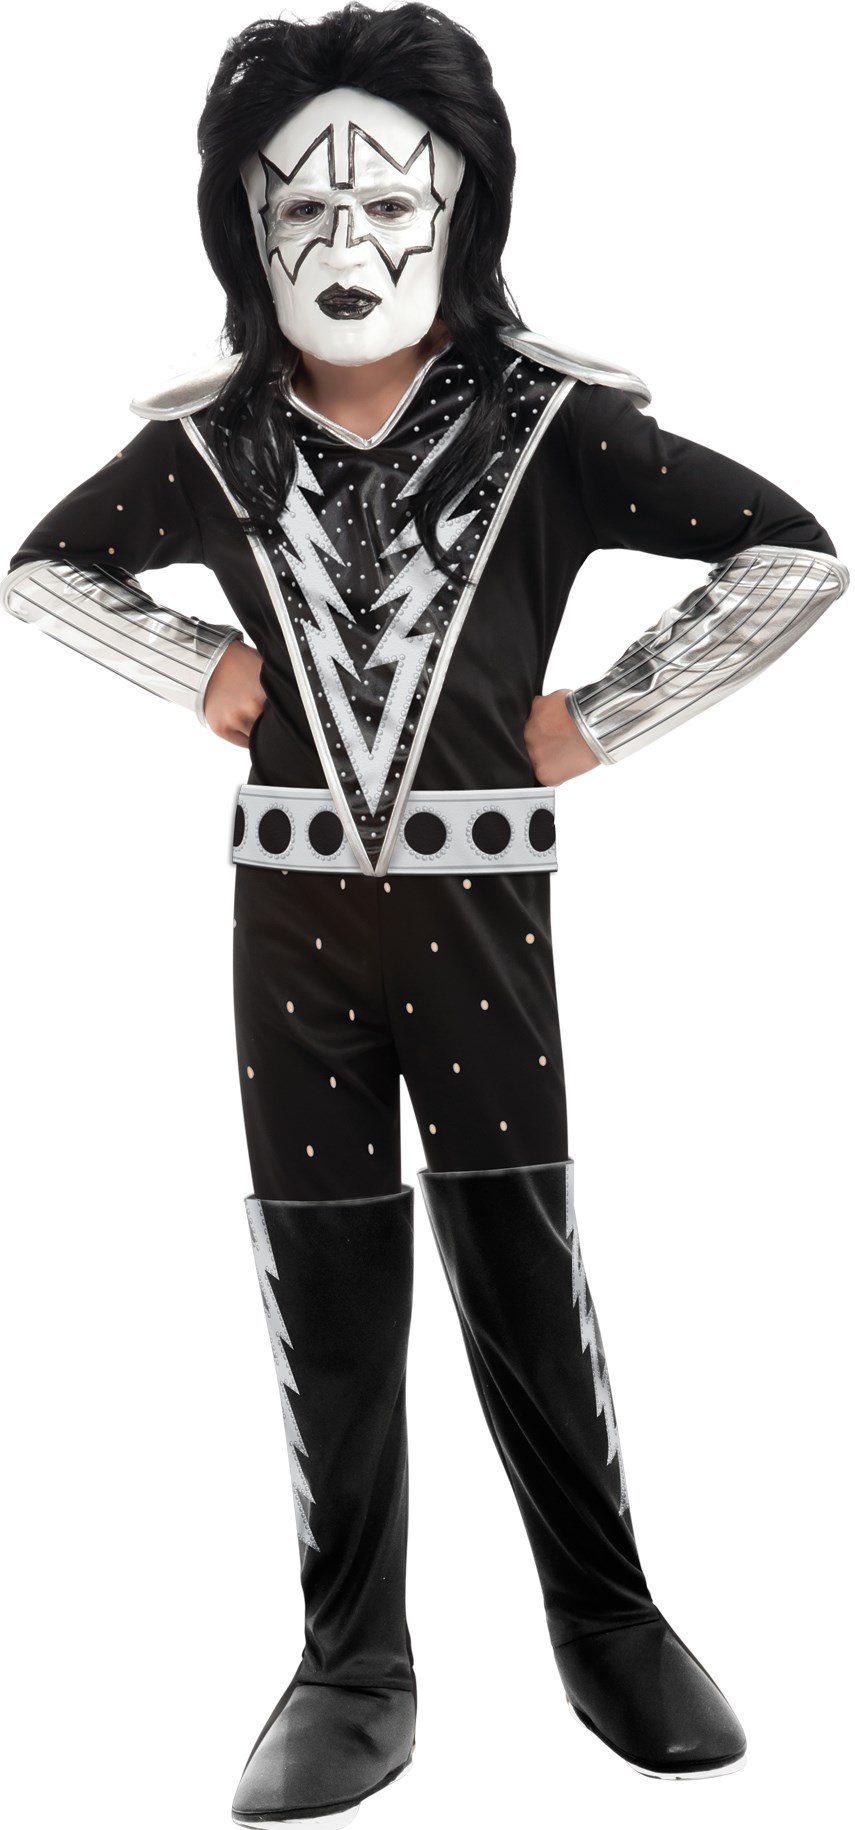 KISS - Spaceman Deluxe Child Costume